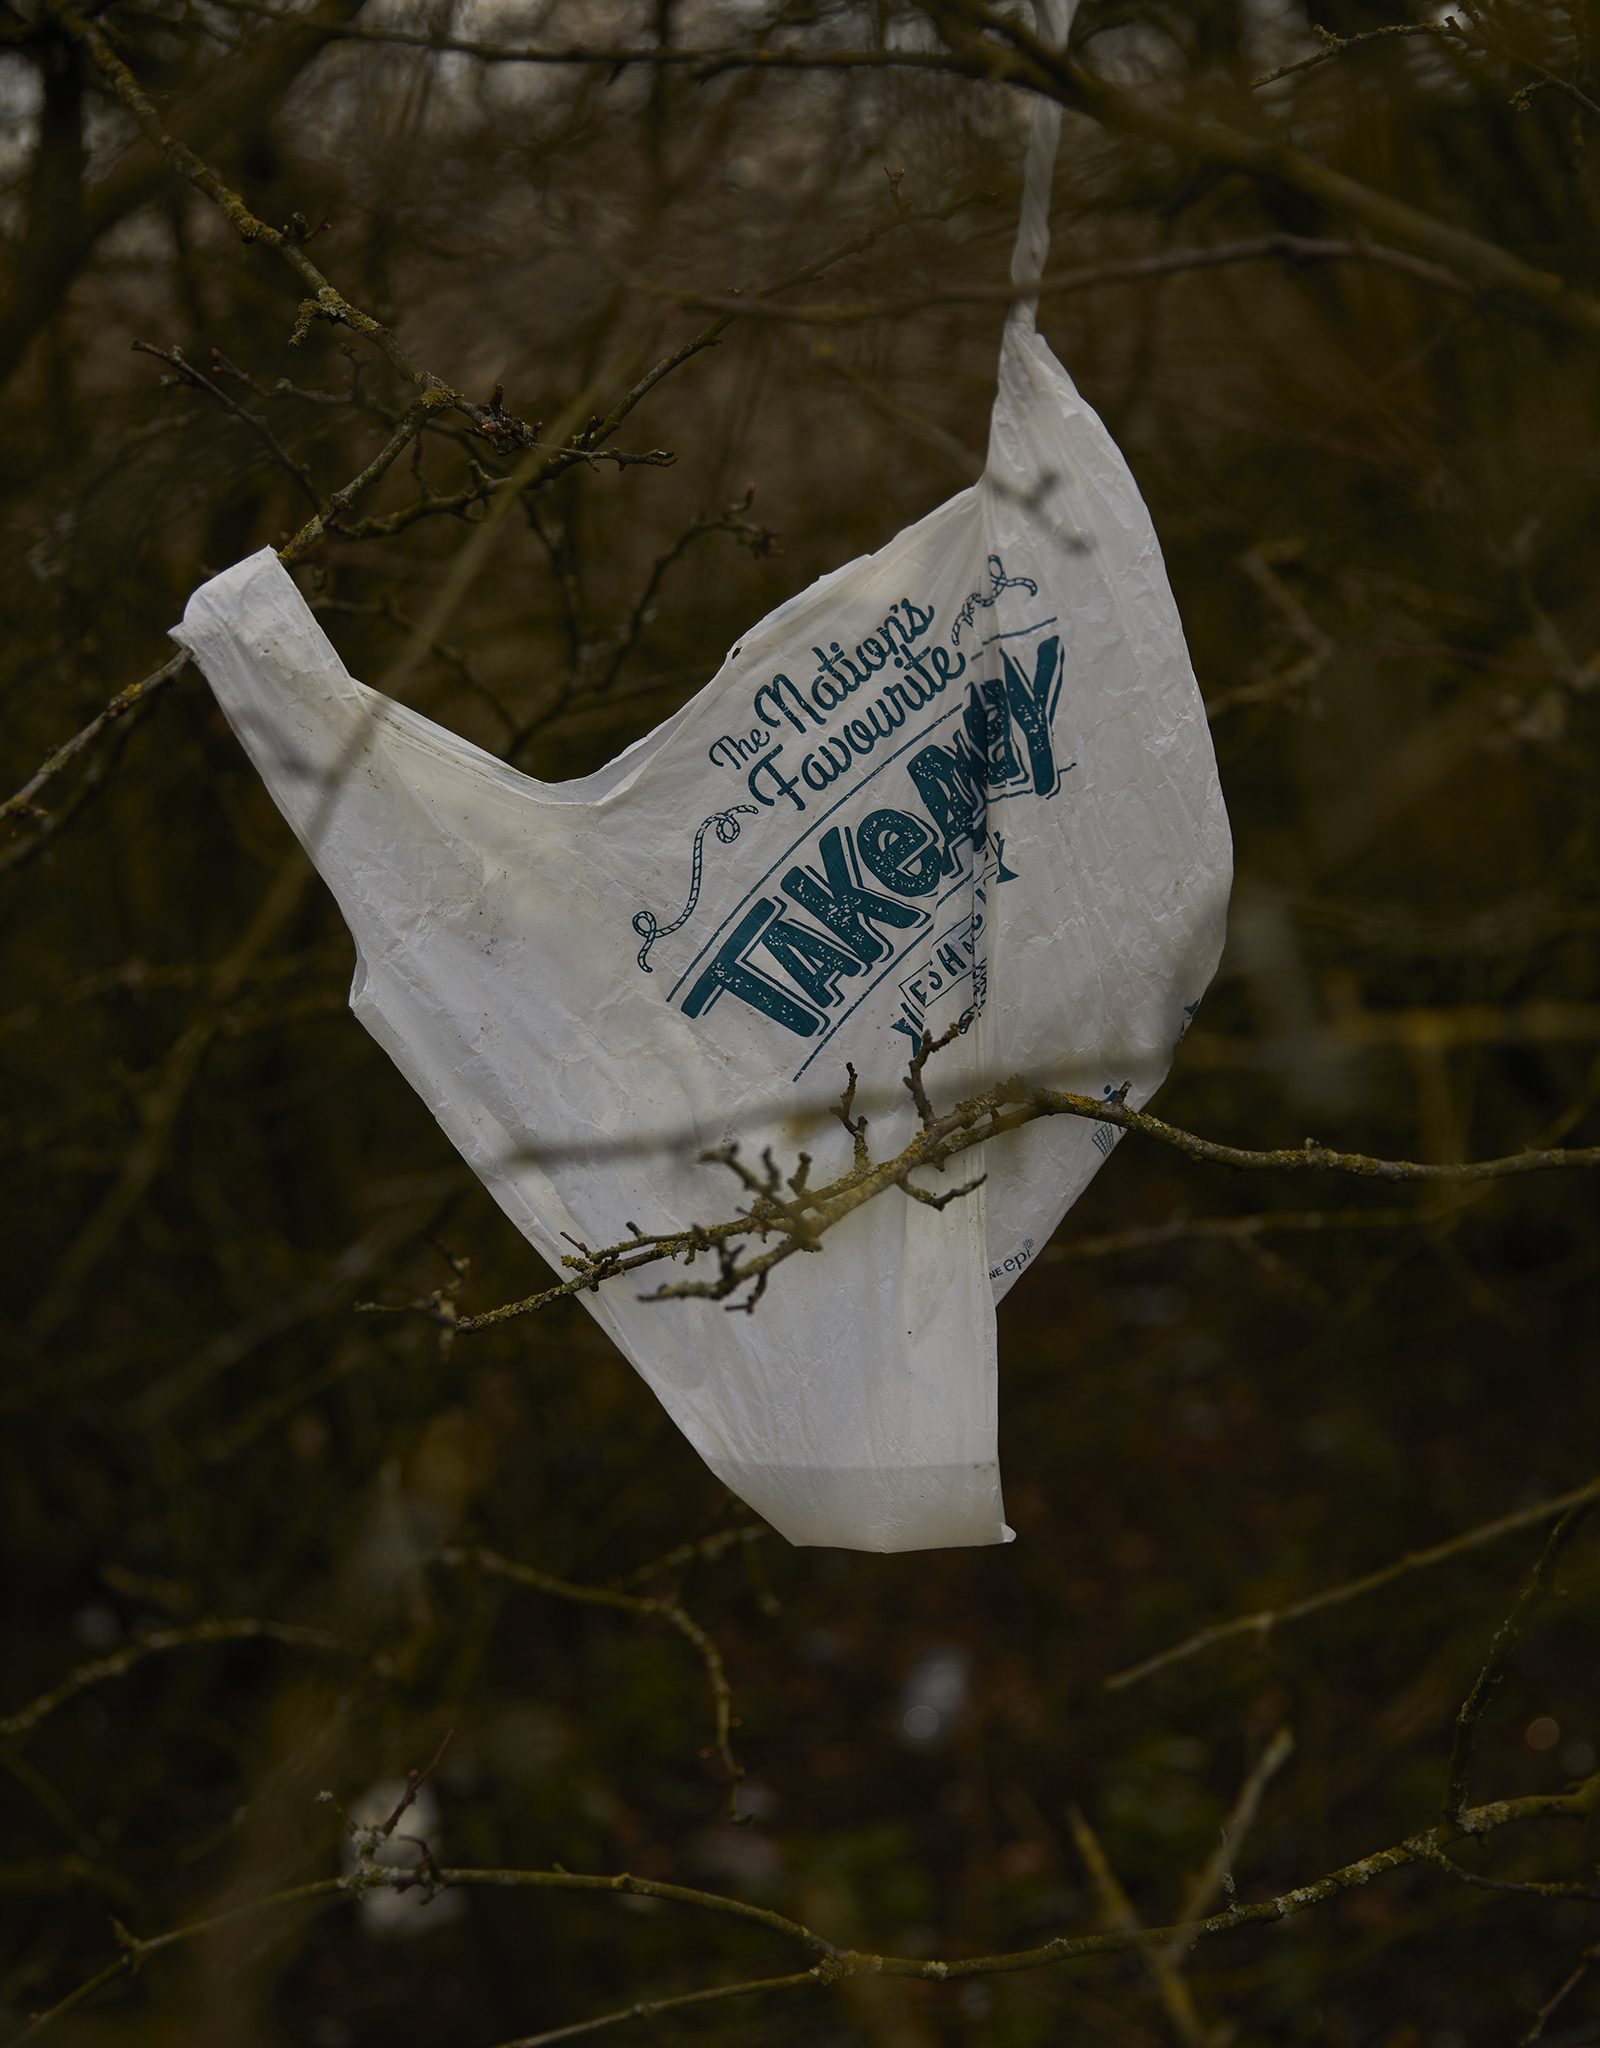 Plastic carrier bag, The Nations Favourite Takeaway Fish and Chips